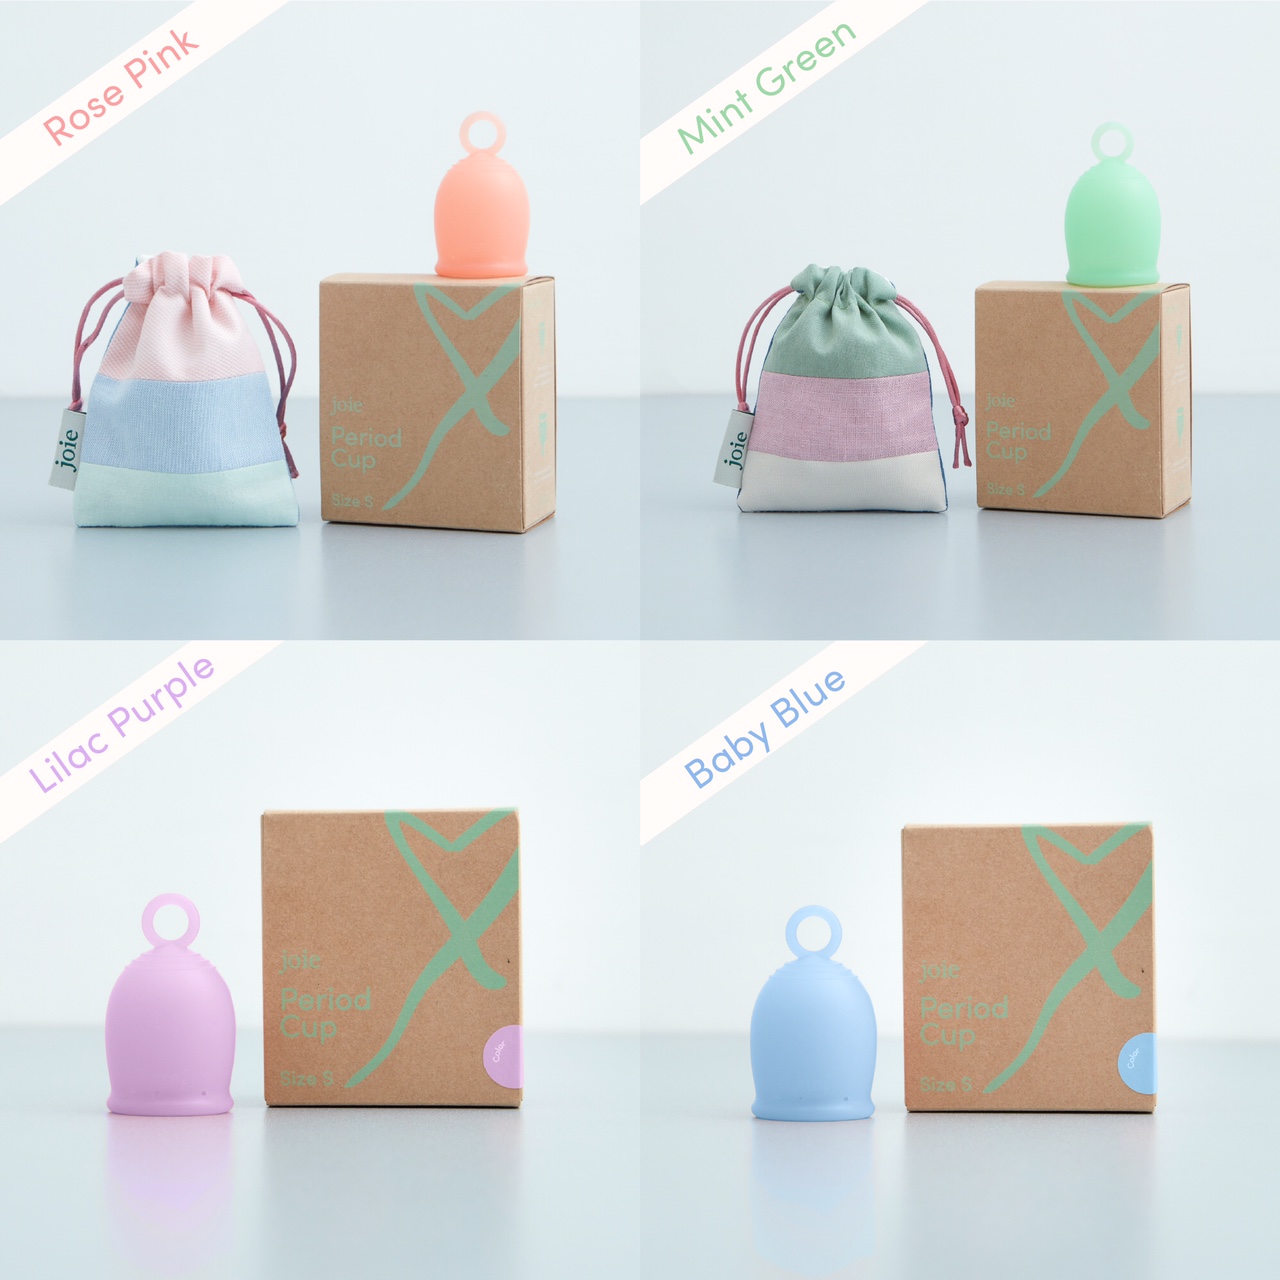 JOIE menstrual cup all colors